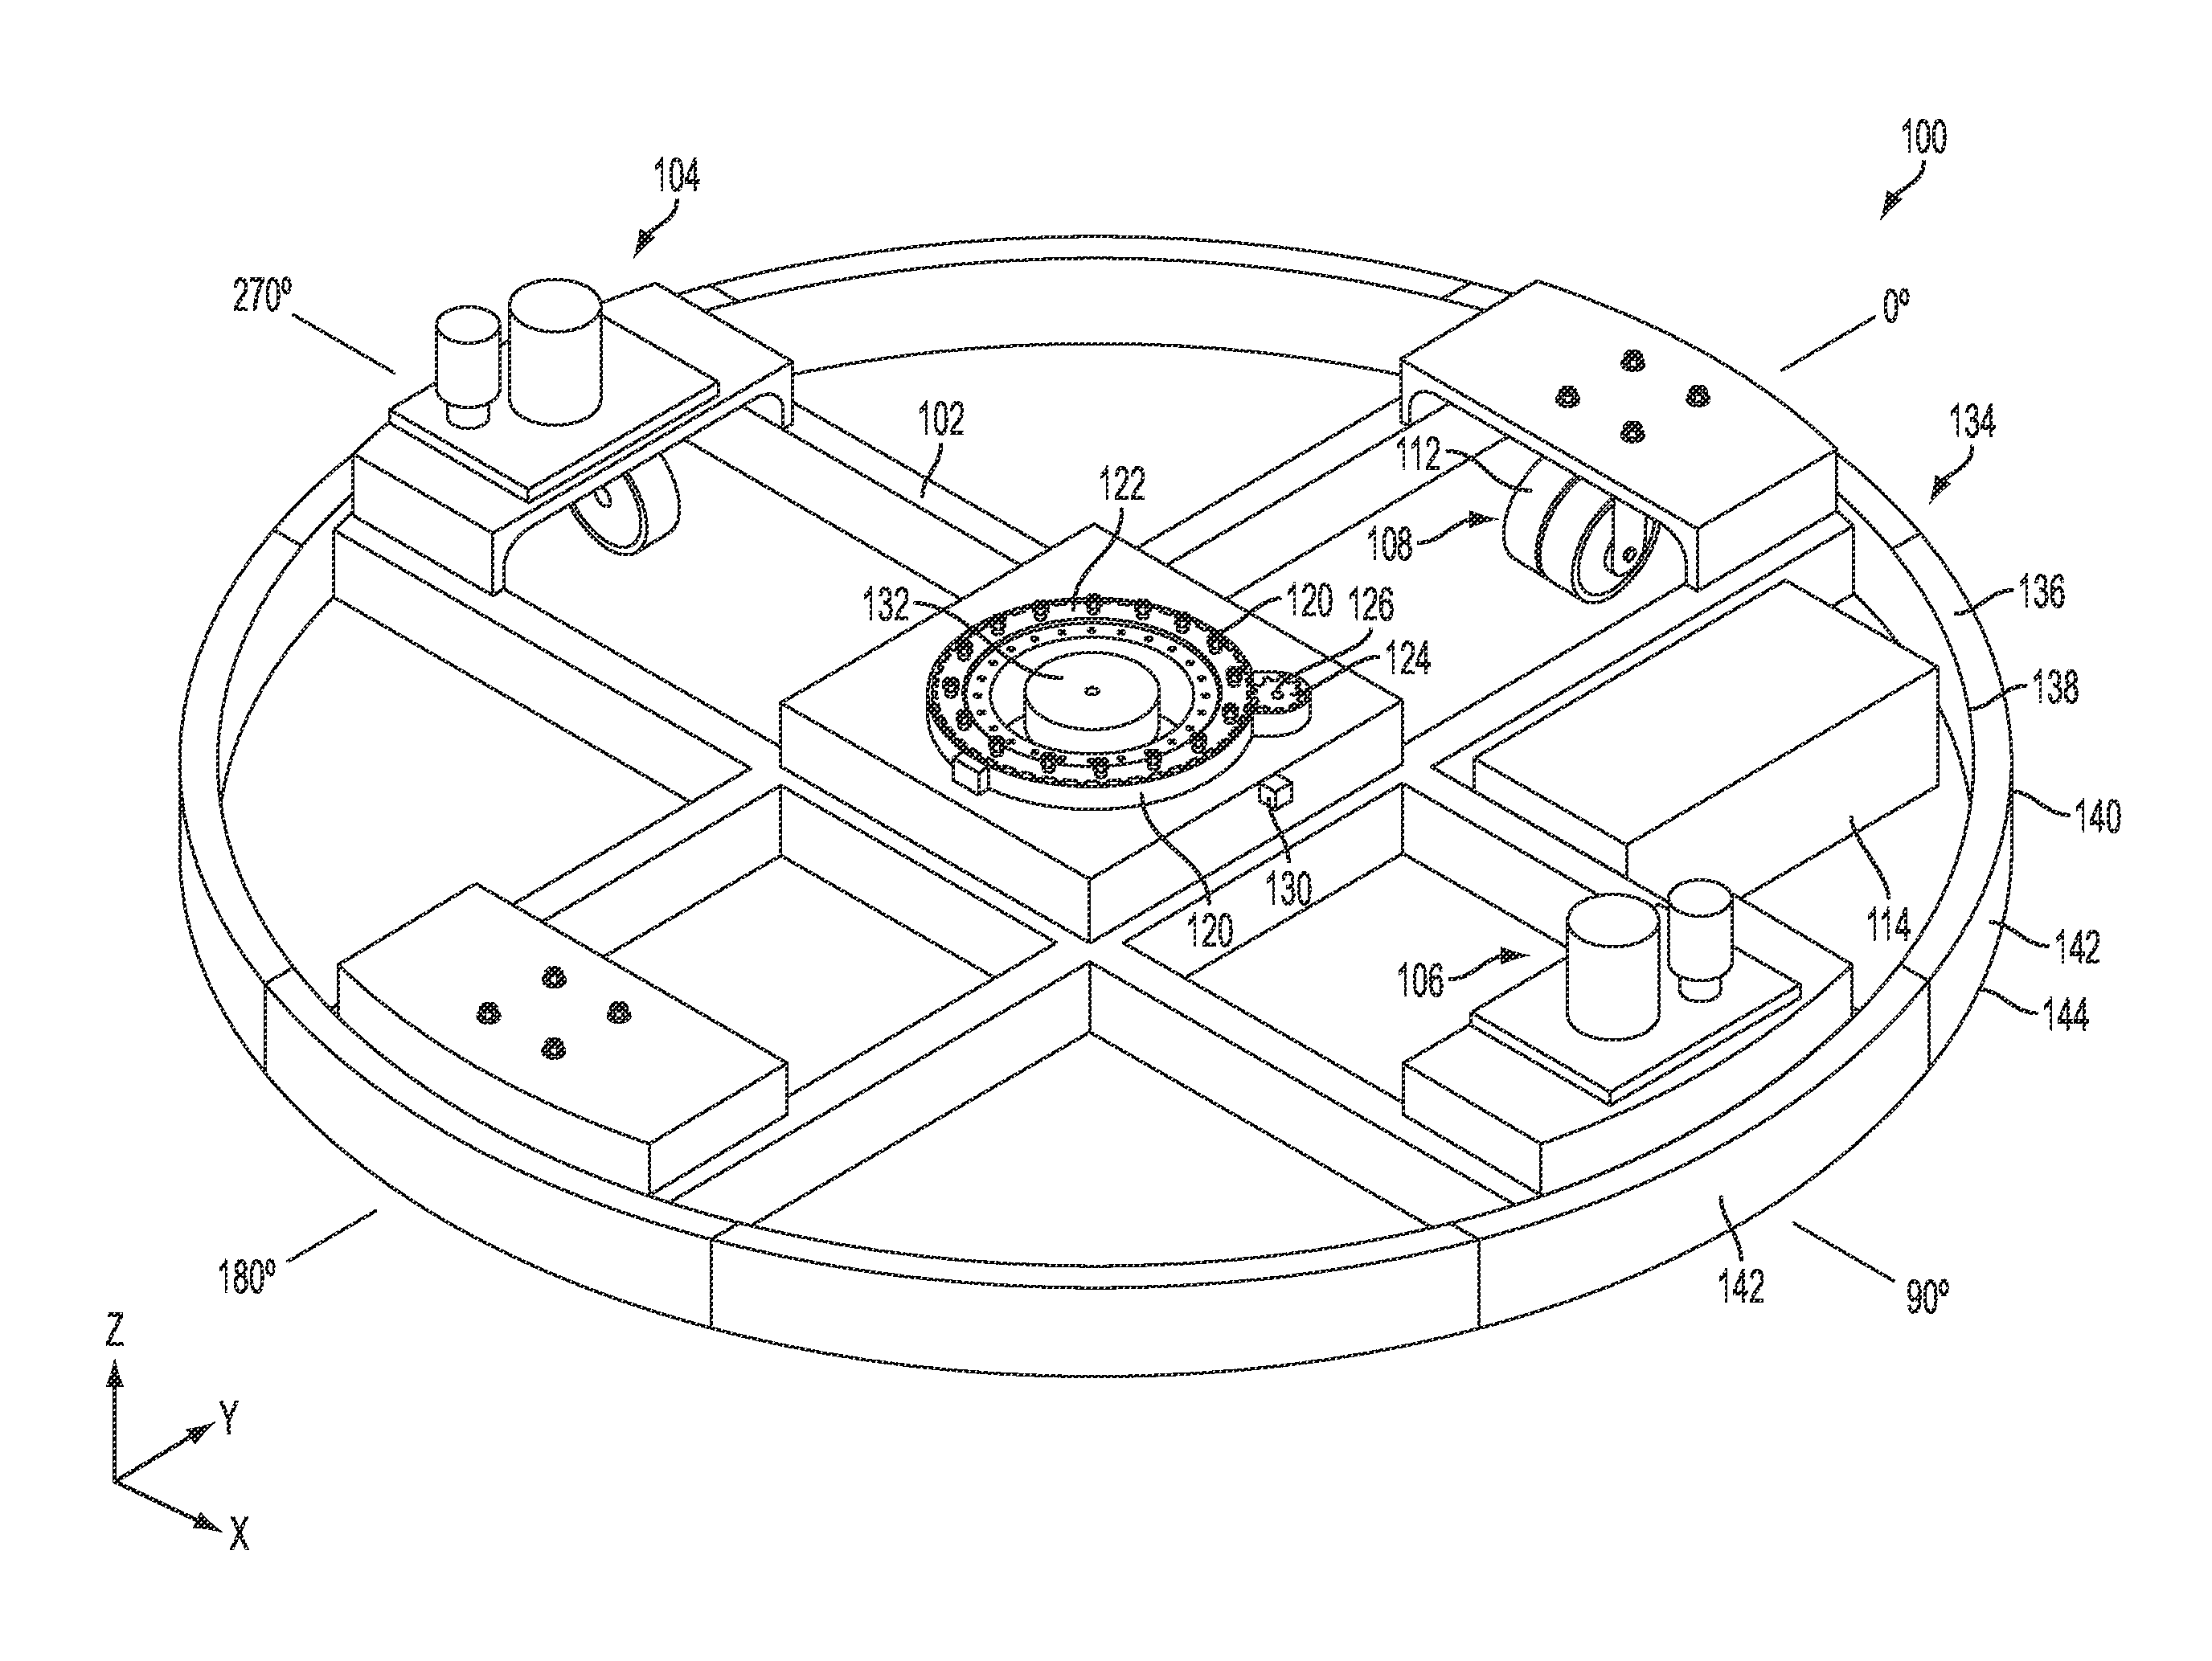 Trackless dark ride vehicle, system, and method